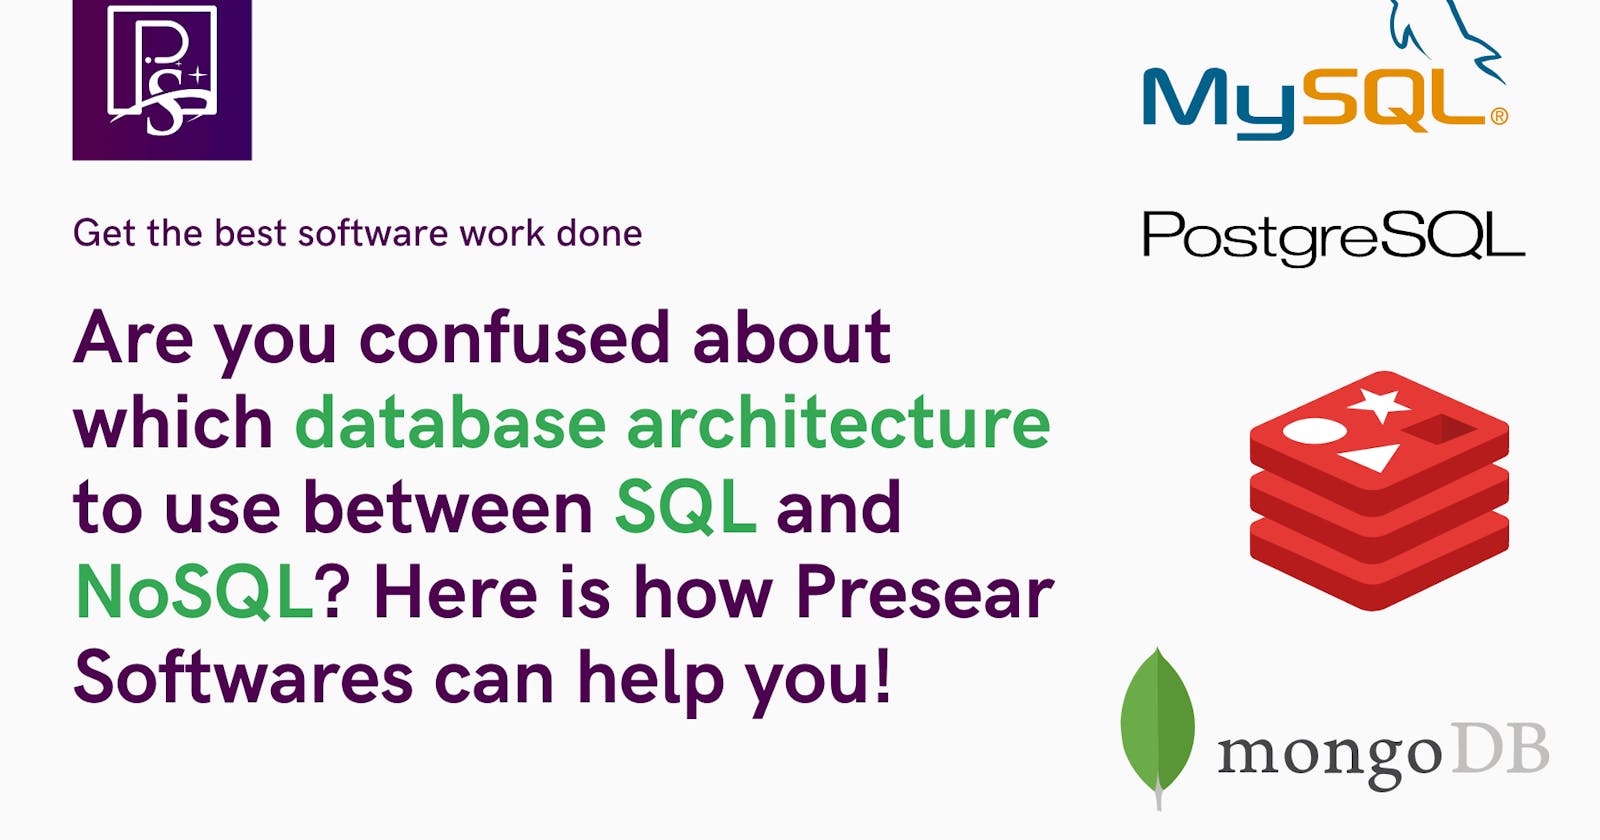 Are you confused about which database architecture to use between SQL and NoSQL? Here is how Presear Softwares can help you!